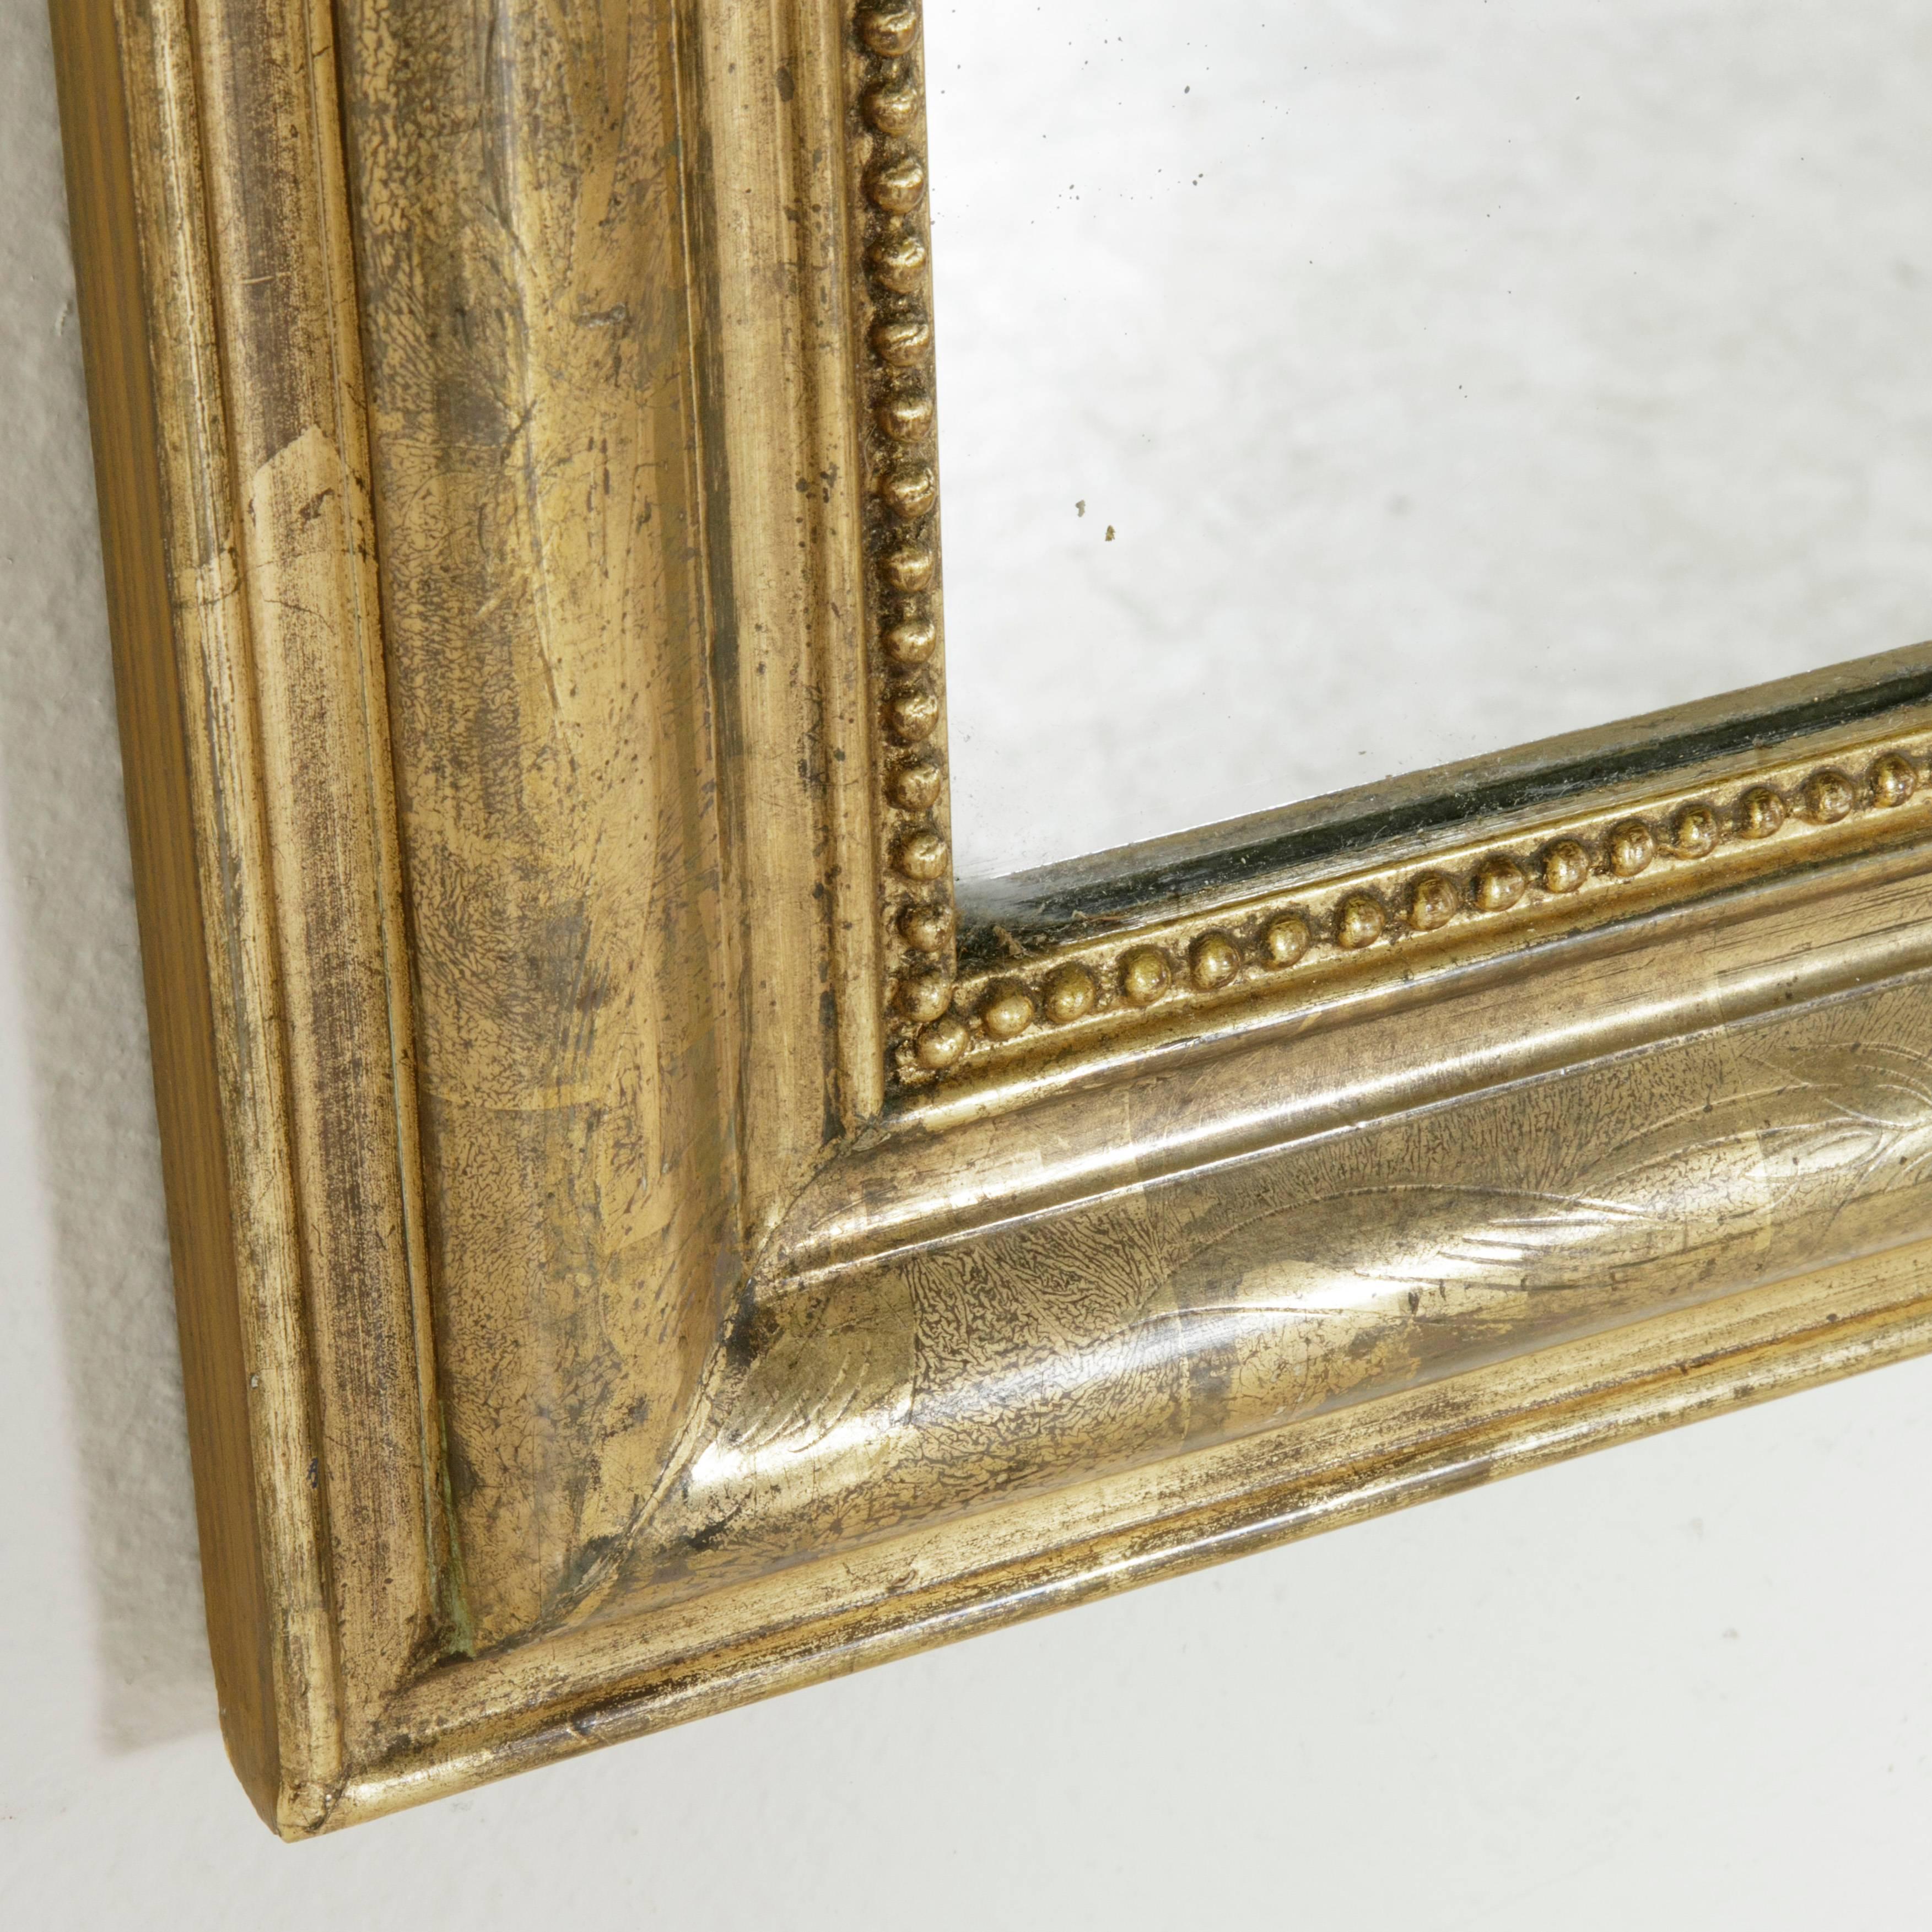 With clean lines and classic look, this nineteenth century Louis Philippe style giltwood mirror boasts its original mercury glass and a beautiful bronze color. The frame features an intricately incised pattern of leaves on its gold leafed water gilt